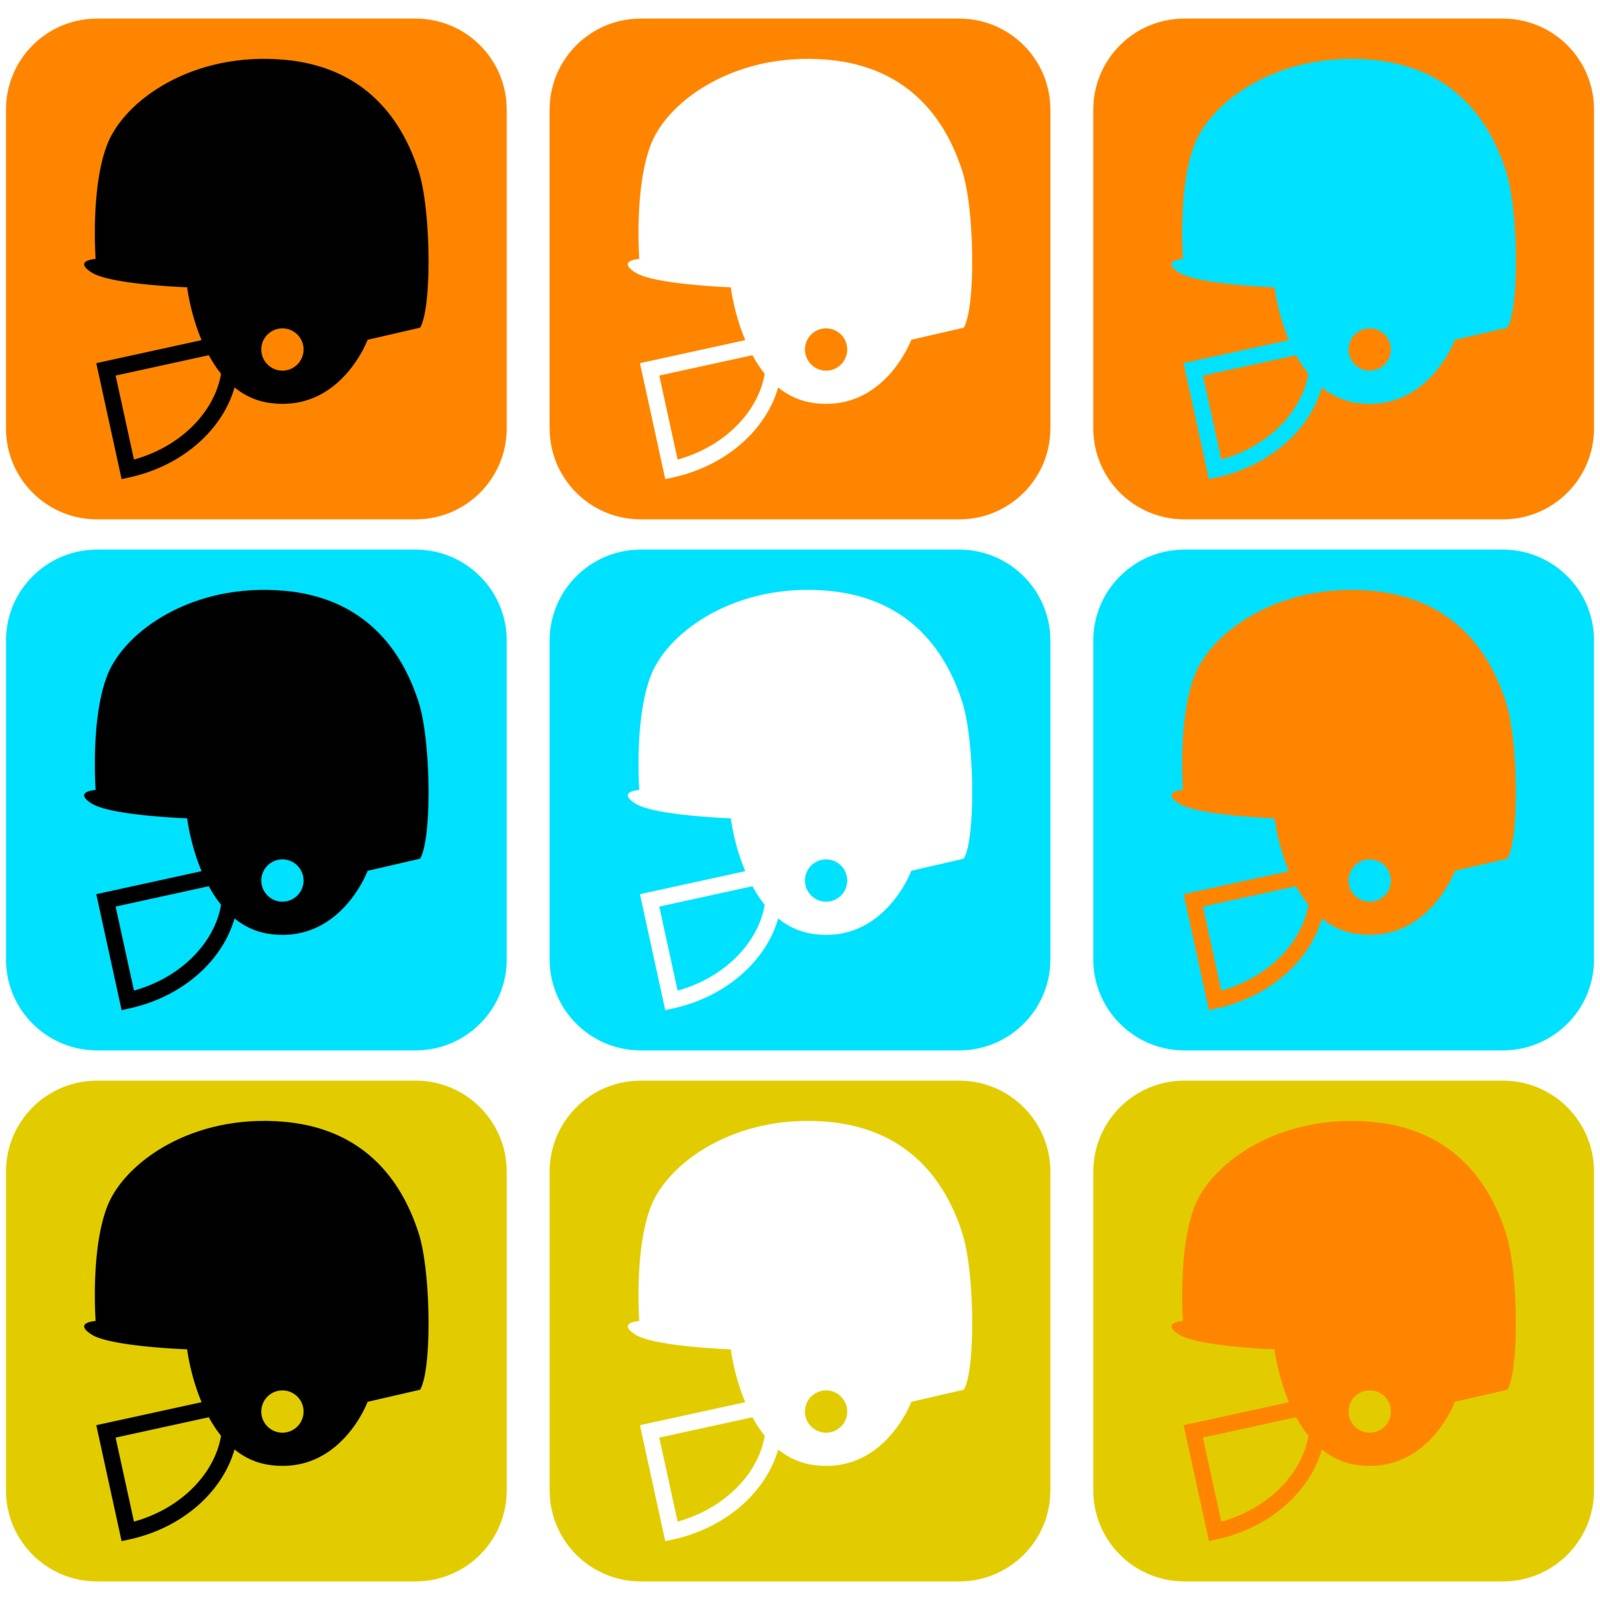 Flat design icon set showing a football helmet in different color combinations